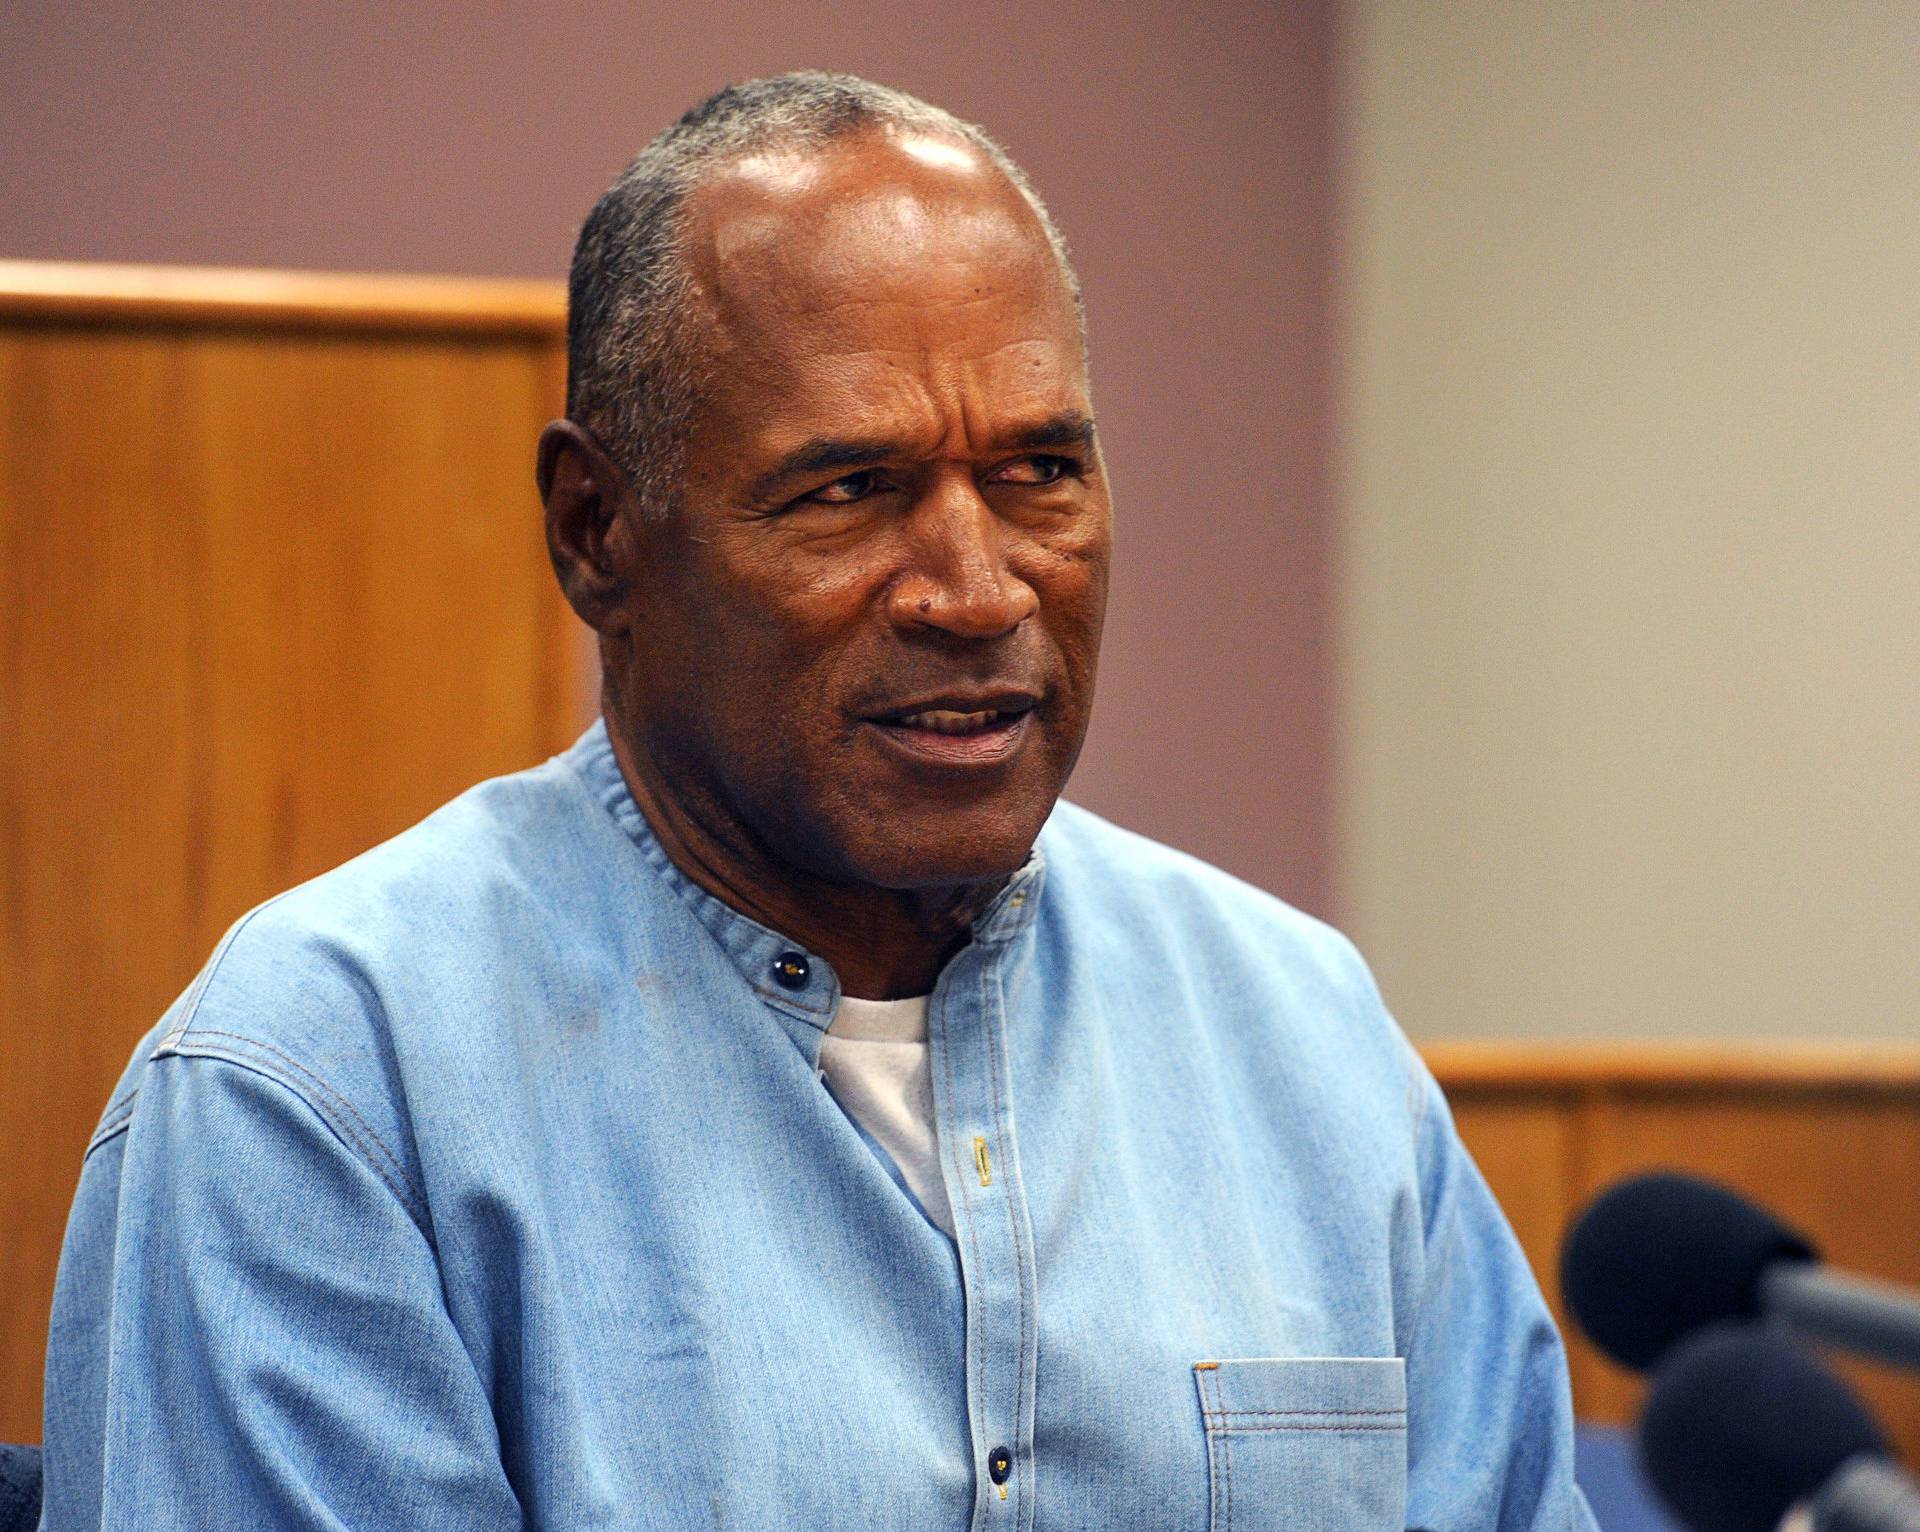 O.J. Simpson reacts during his parole hearing at Lovelock Correctional Centre in Lovelock